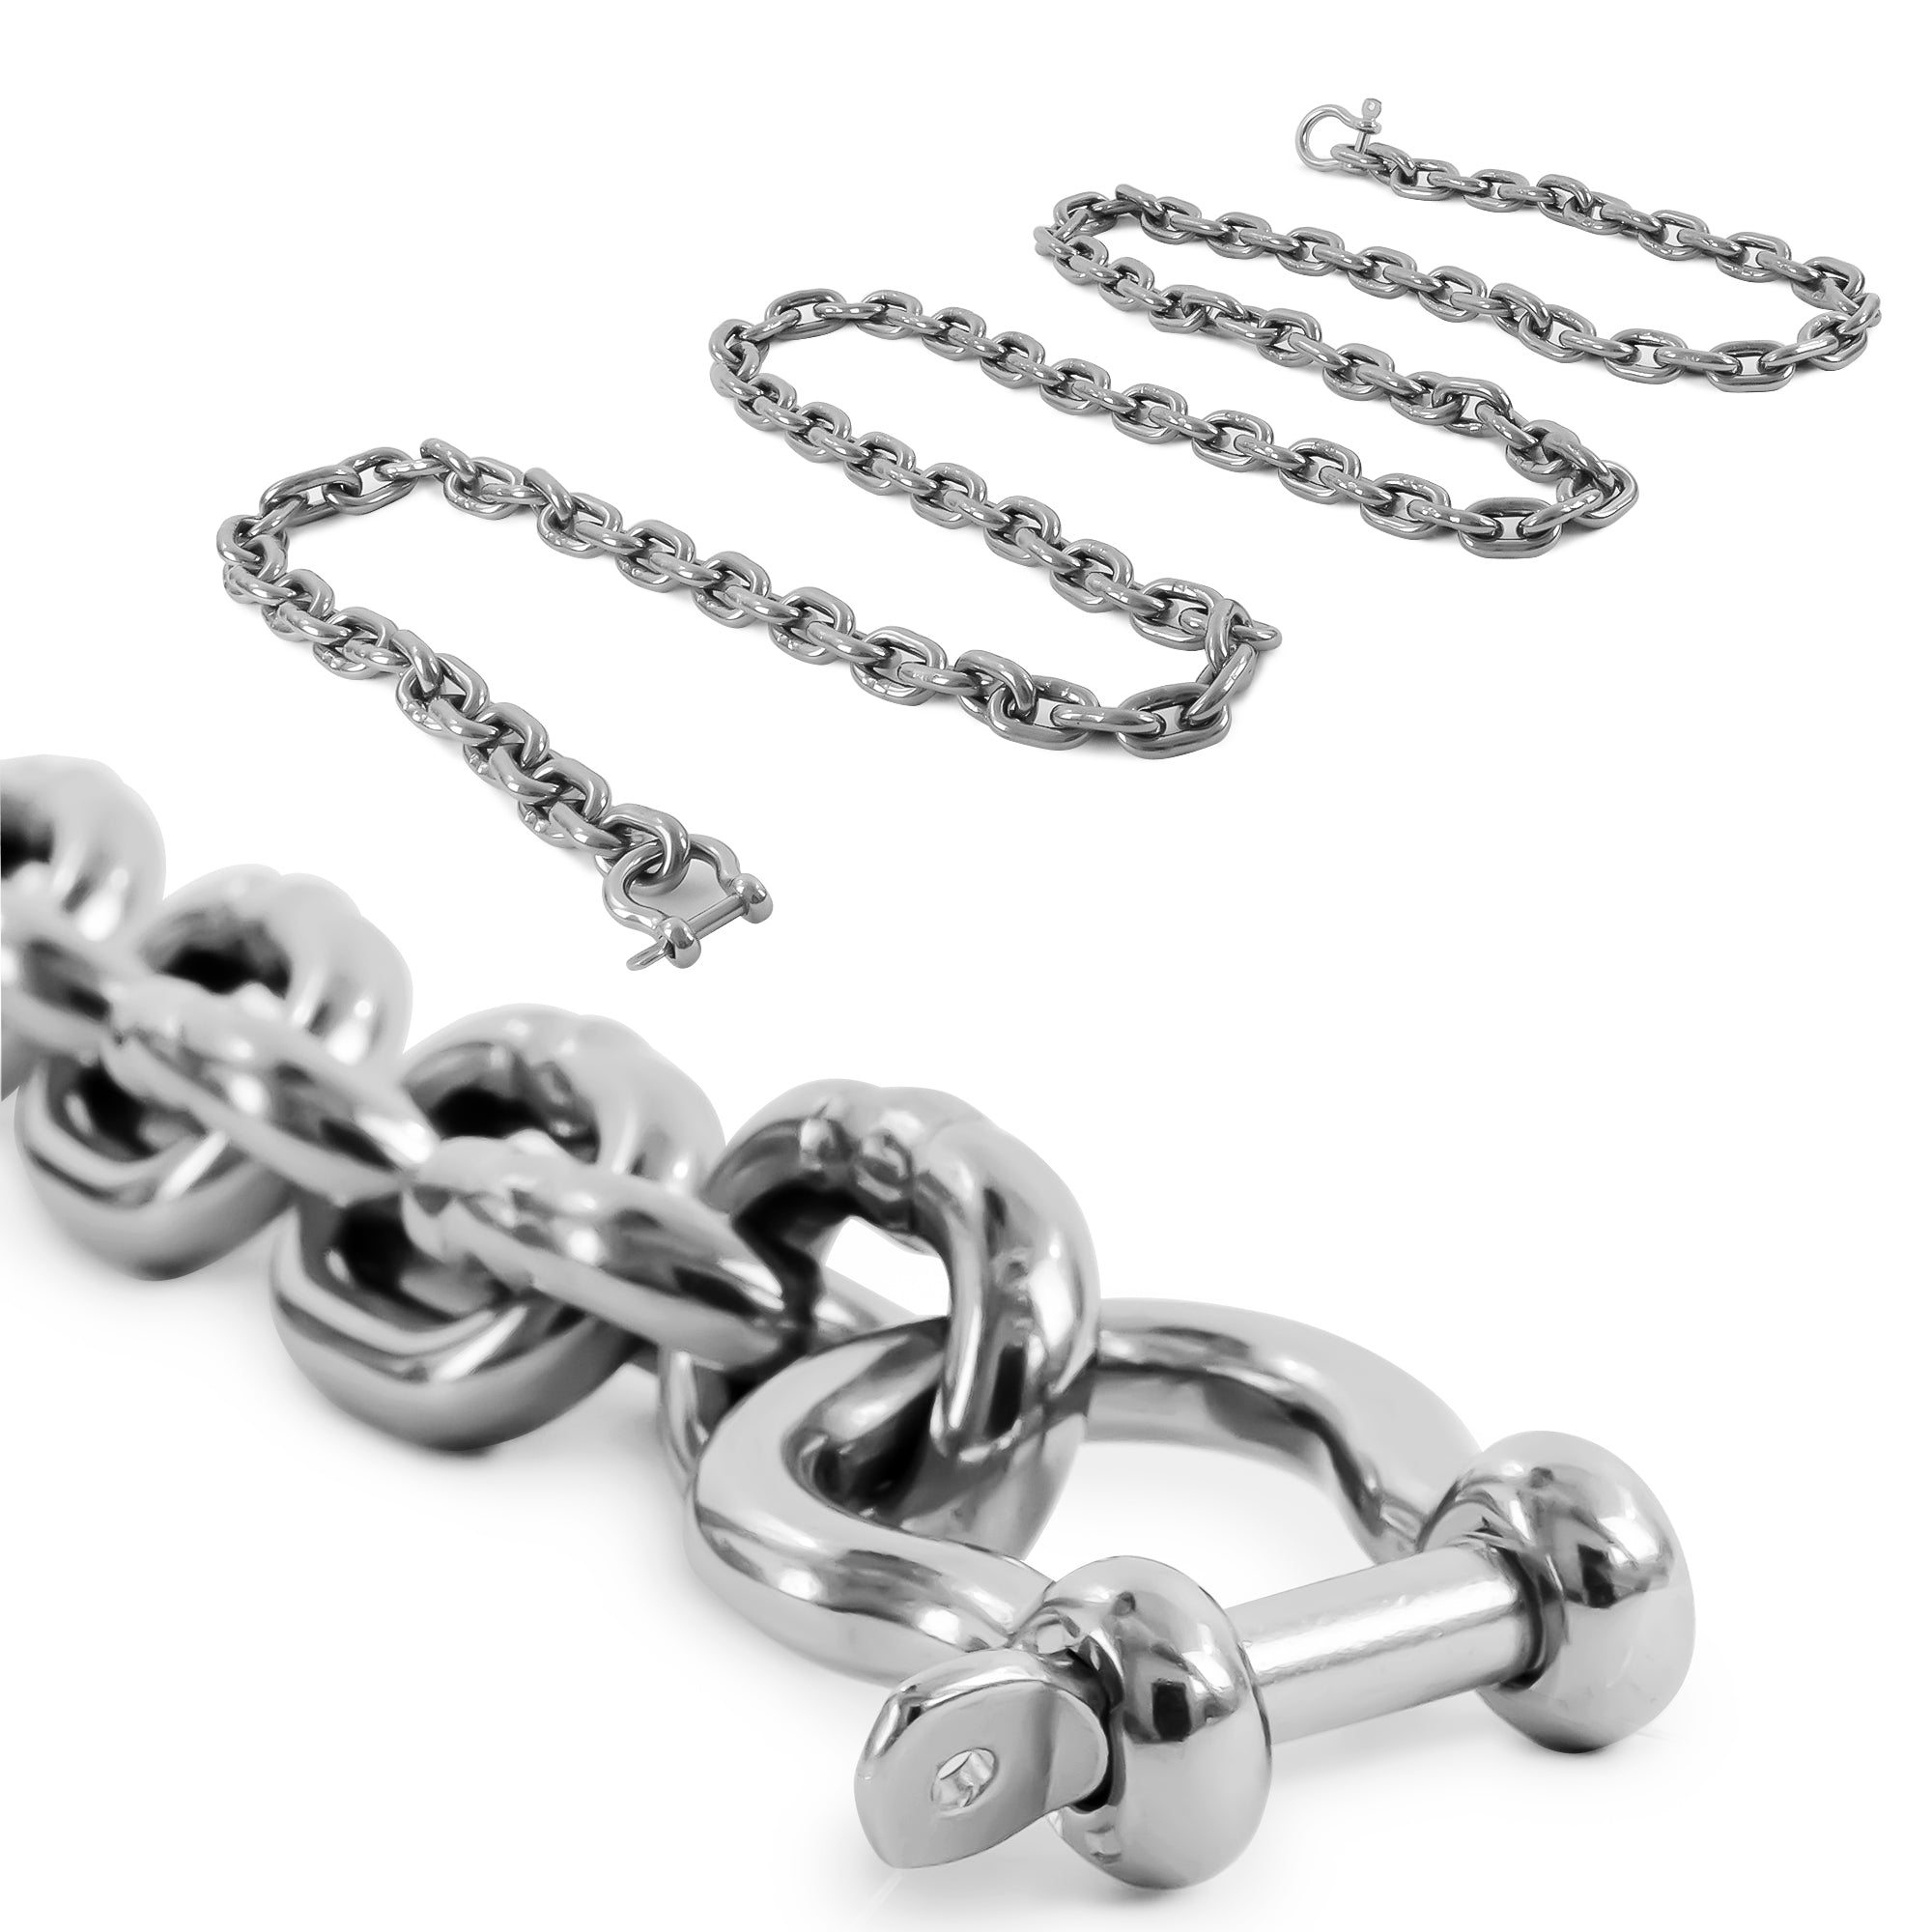 Boat Anchor Lead Chain with Shackles, 1/4" x 10', HTG4 Stainless Steel - FO4492-S10